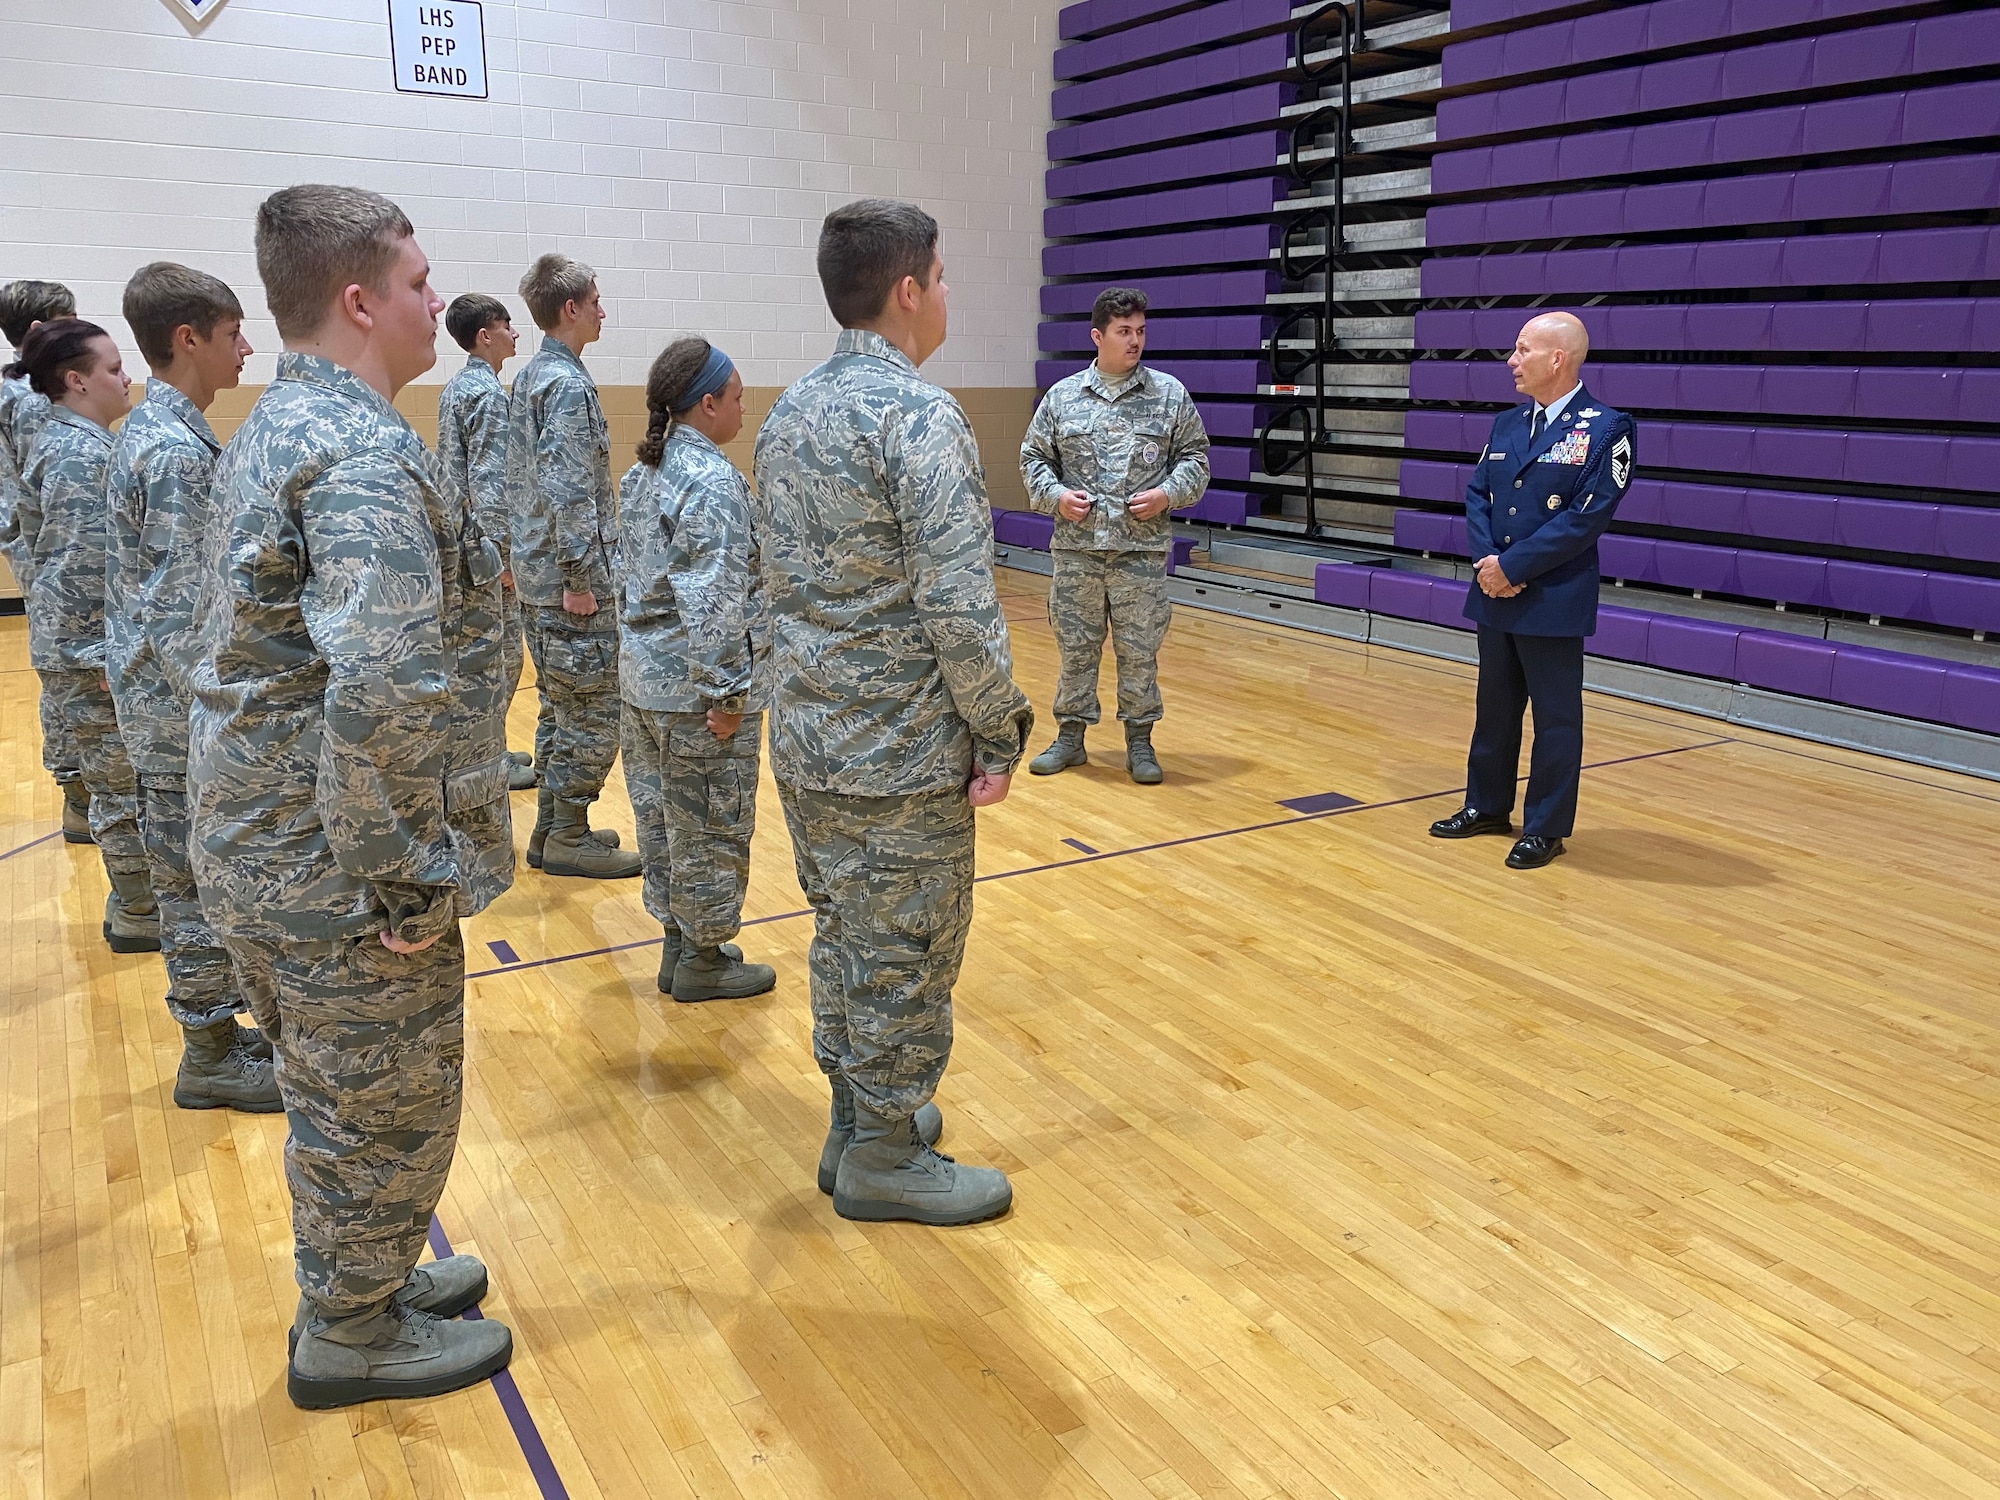 Retired Chief Master Sgt. David Dillon, an Air Force Junior ROTC Aerospace Science Instructor, teaches marching techniques to cadets at Logan High School in Logan, Ohio, Aug. 29, 2022.  Logan High School received approval to start an Air Force Junior ROTC program last year, and the program started its first full academic year in August of 2022